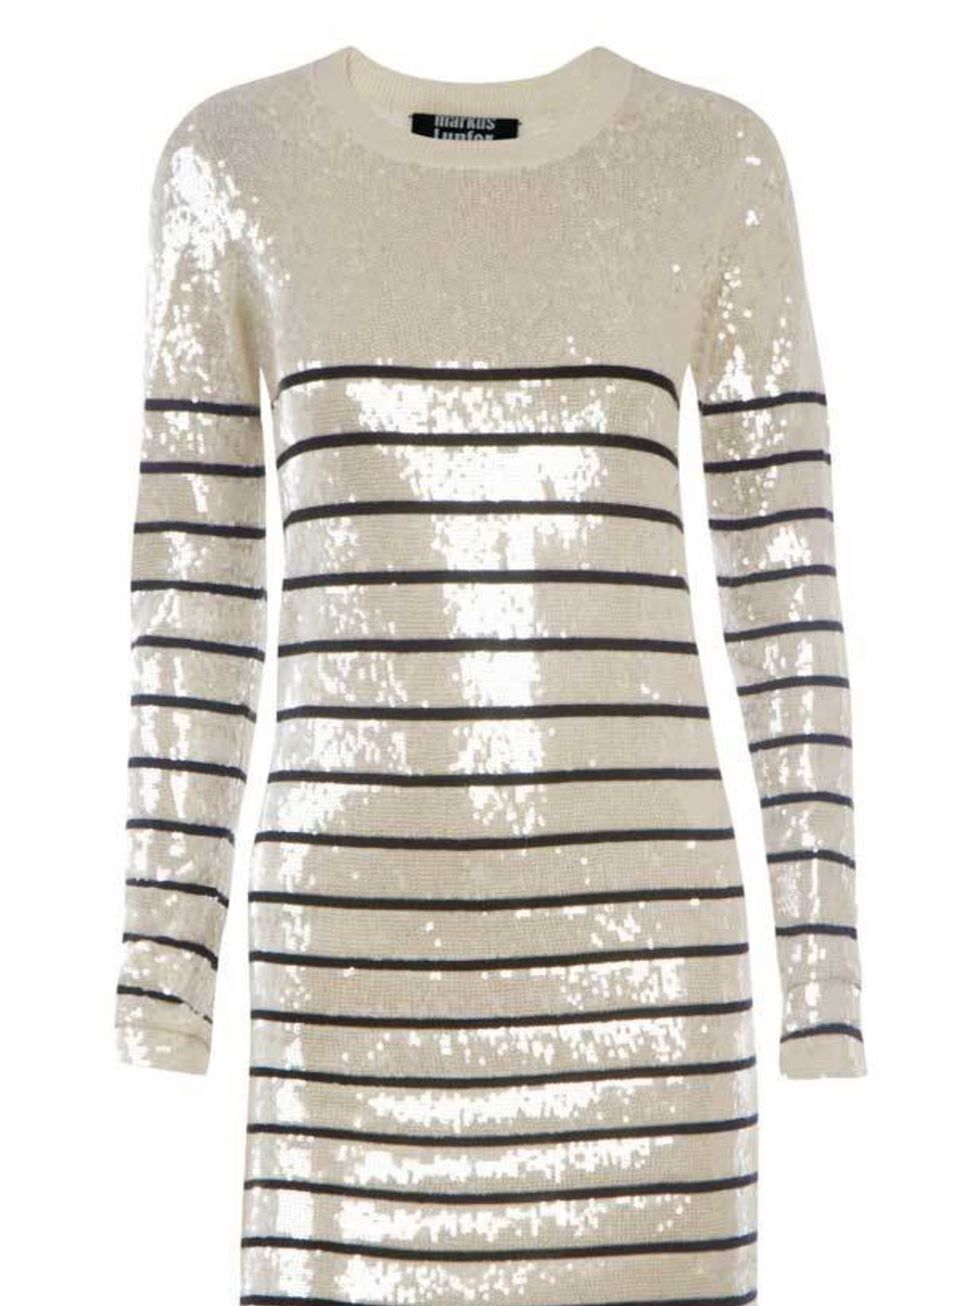 <p>Sequin stripe dress, £798, by Markus Lupfer at <a href="http://www.matchesfashion.com/fcp/categorylist/shop/womens?addFilter=Designers&amp;filterValue=markus%20lupfer">Matches</a> </p>